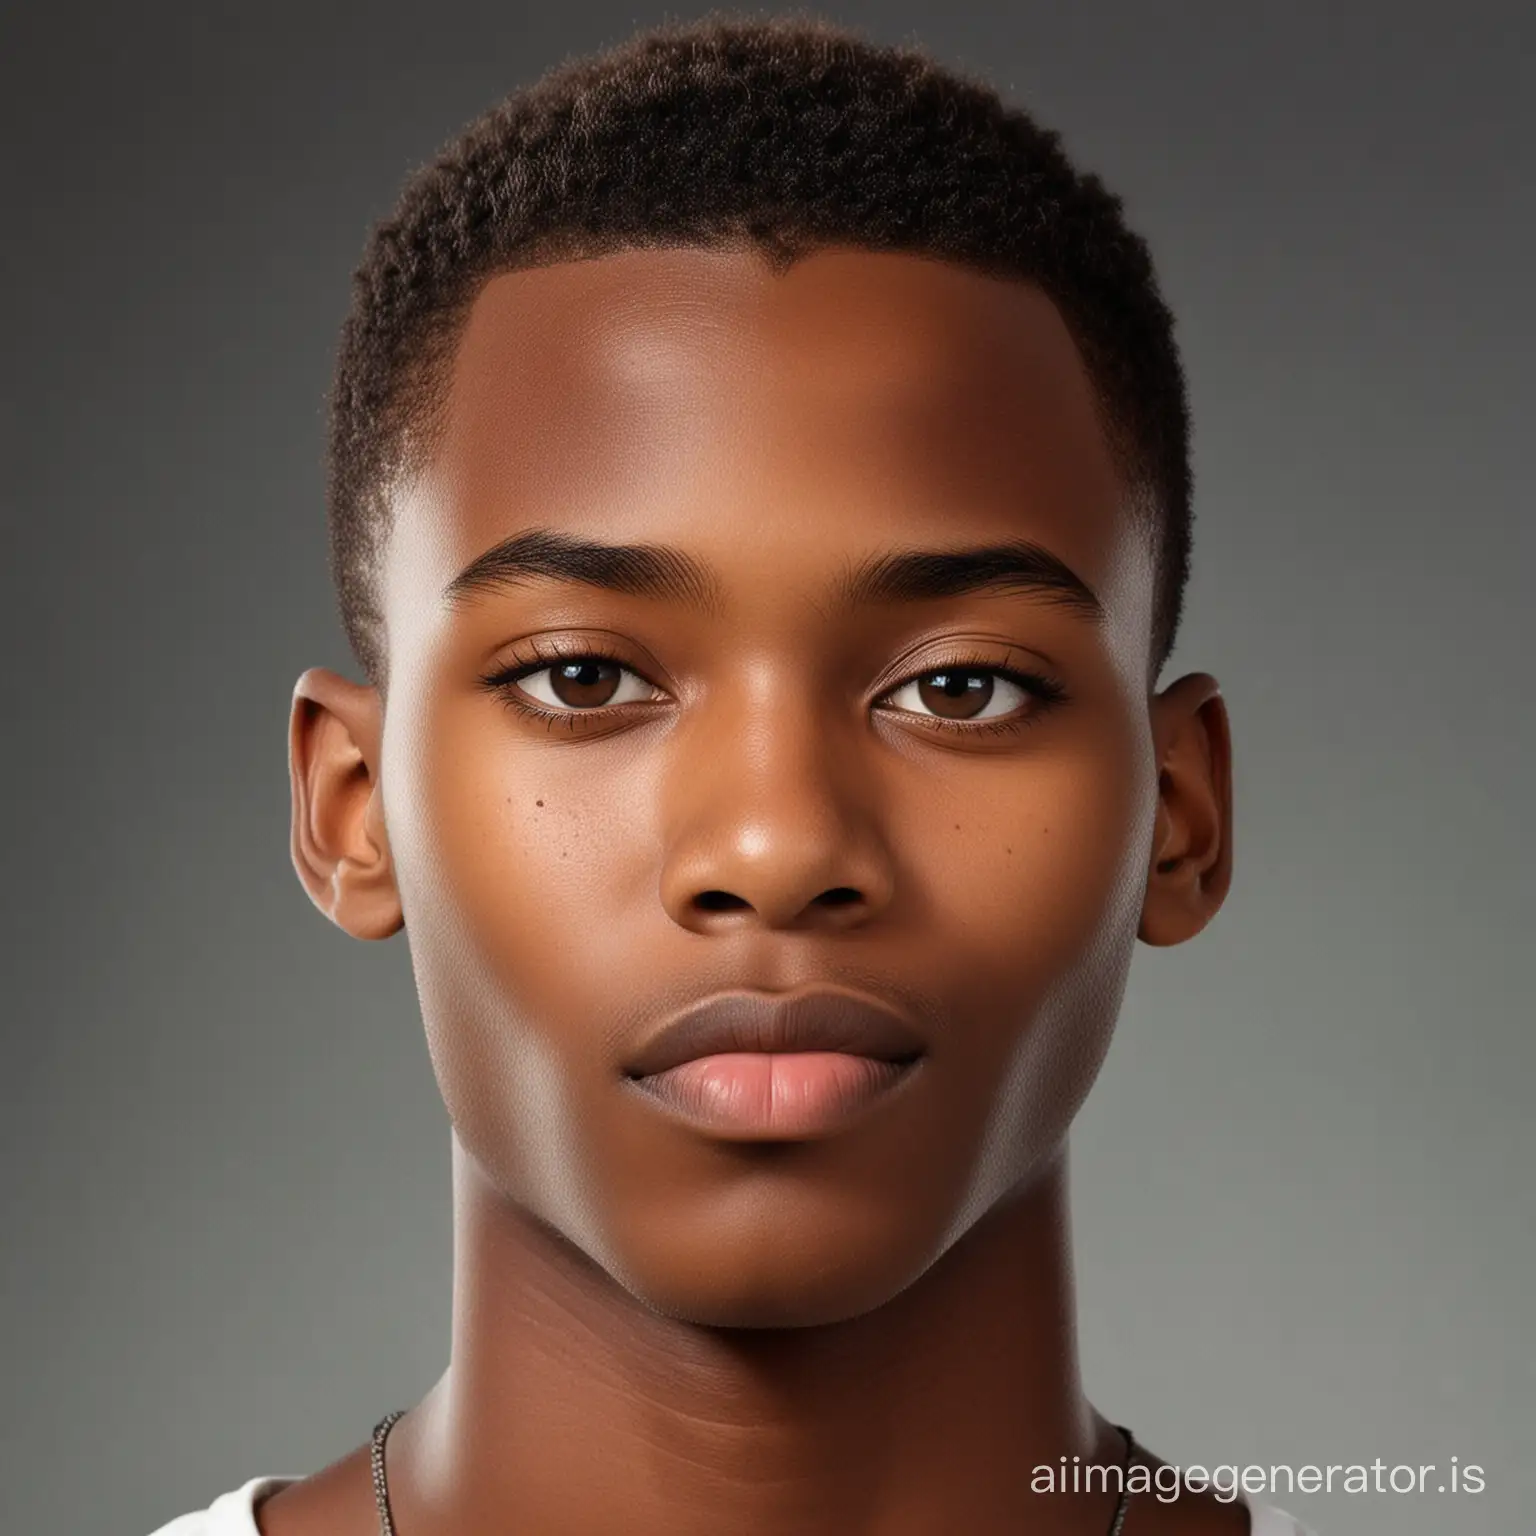 Handsome-West-African-Teenager-with-AlmondShaped-Eyes-and-Short-Cat-Hair